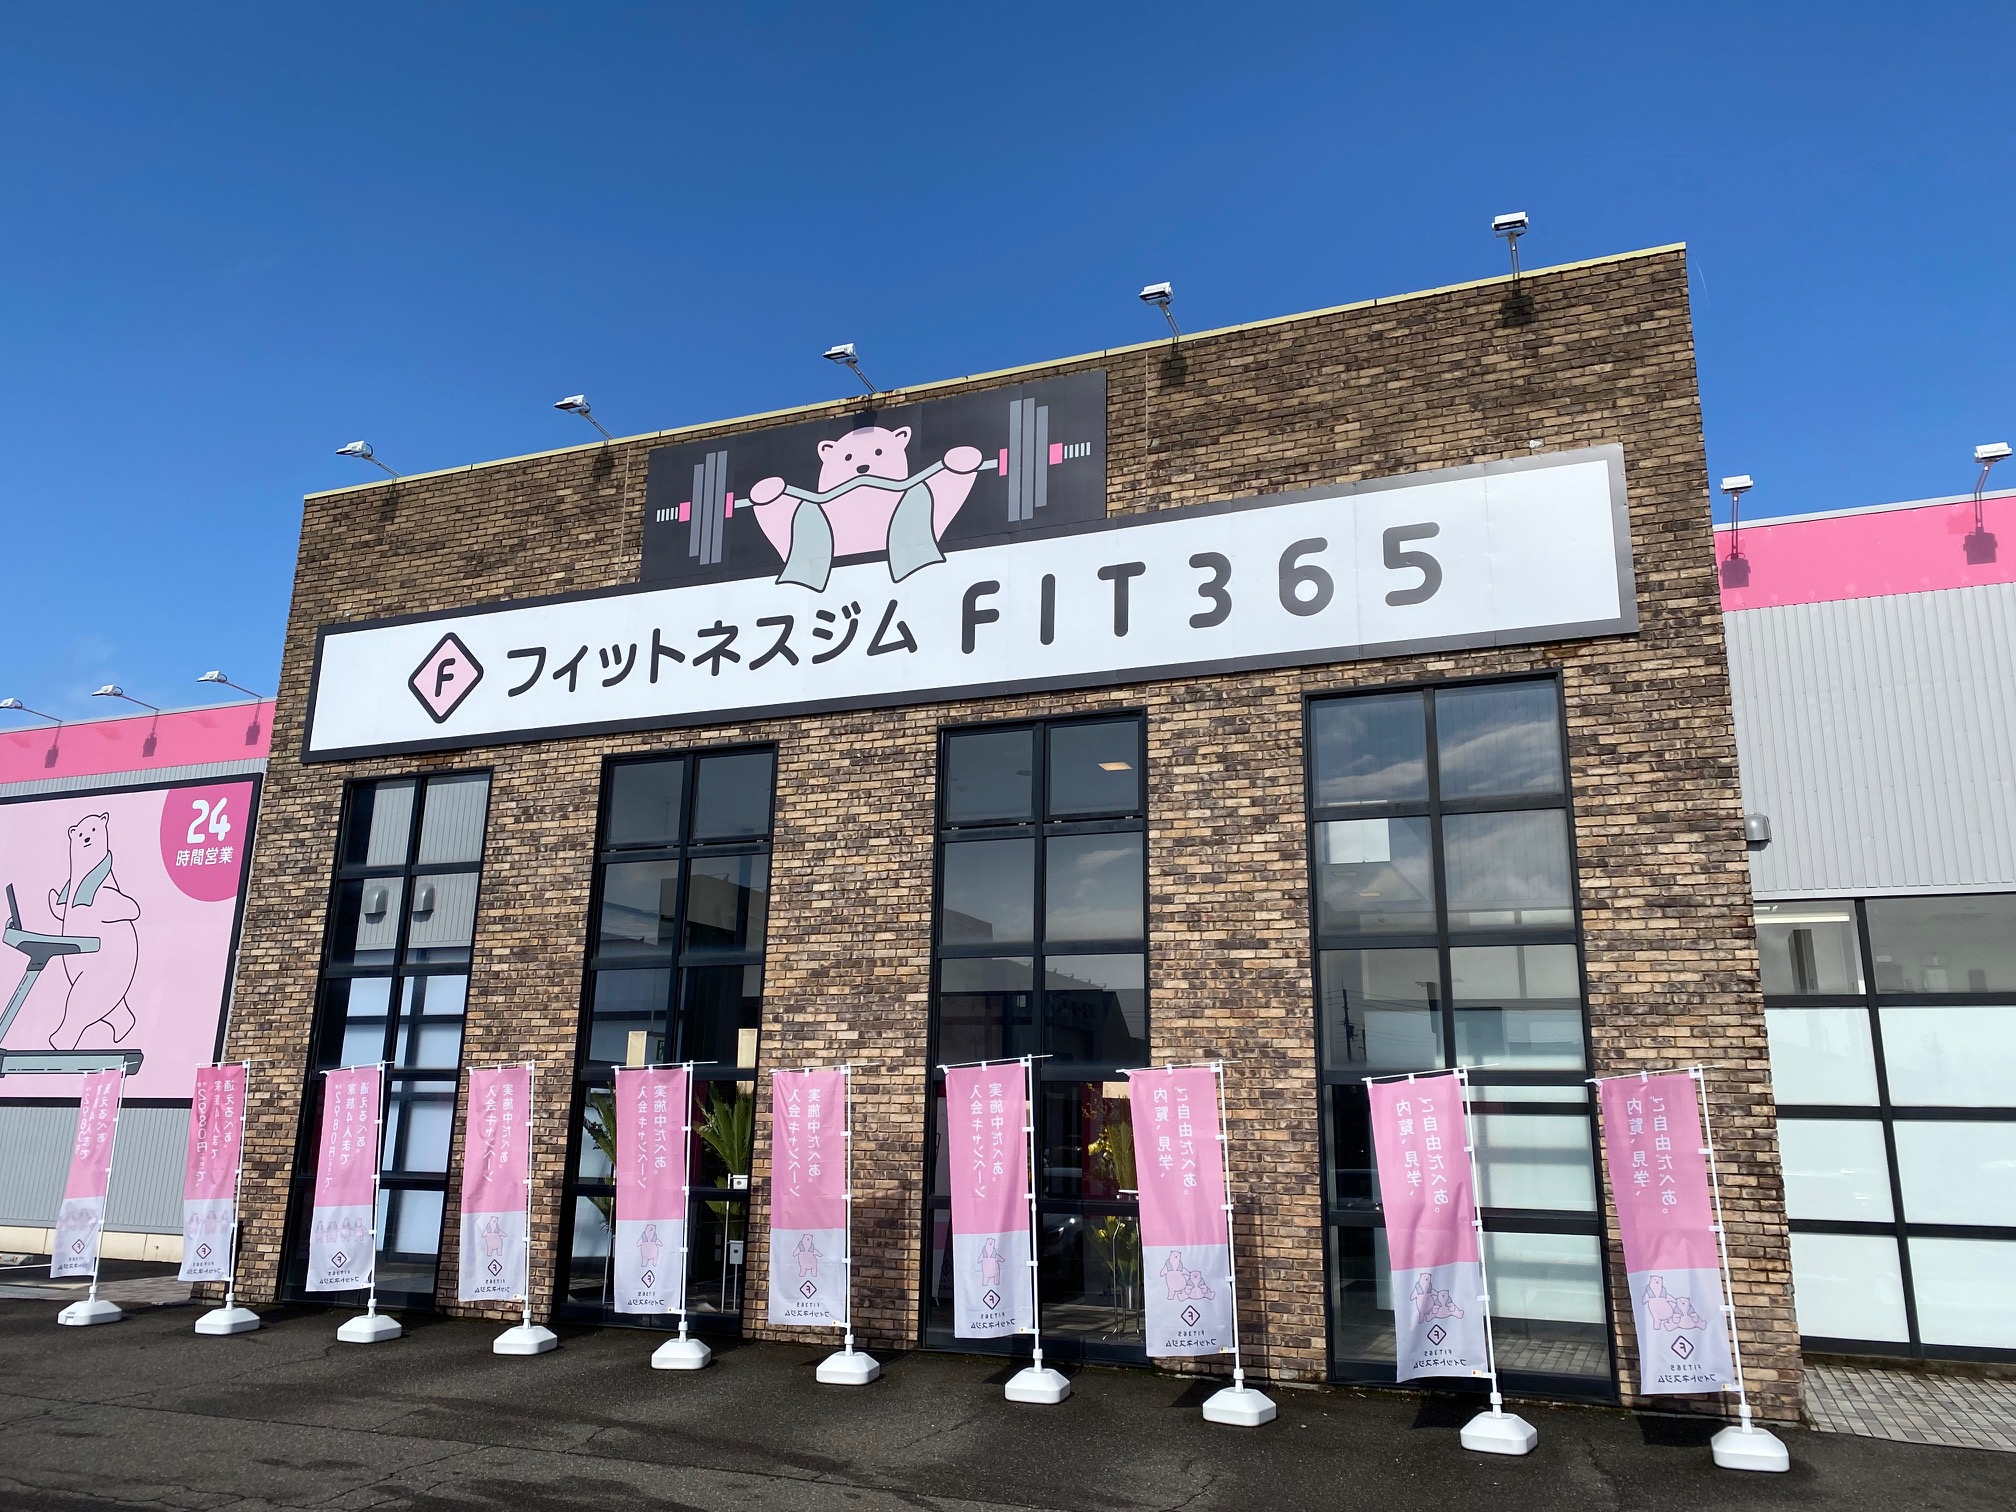 FiT(フィット)365 長岡古正寺店の外観